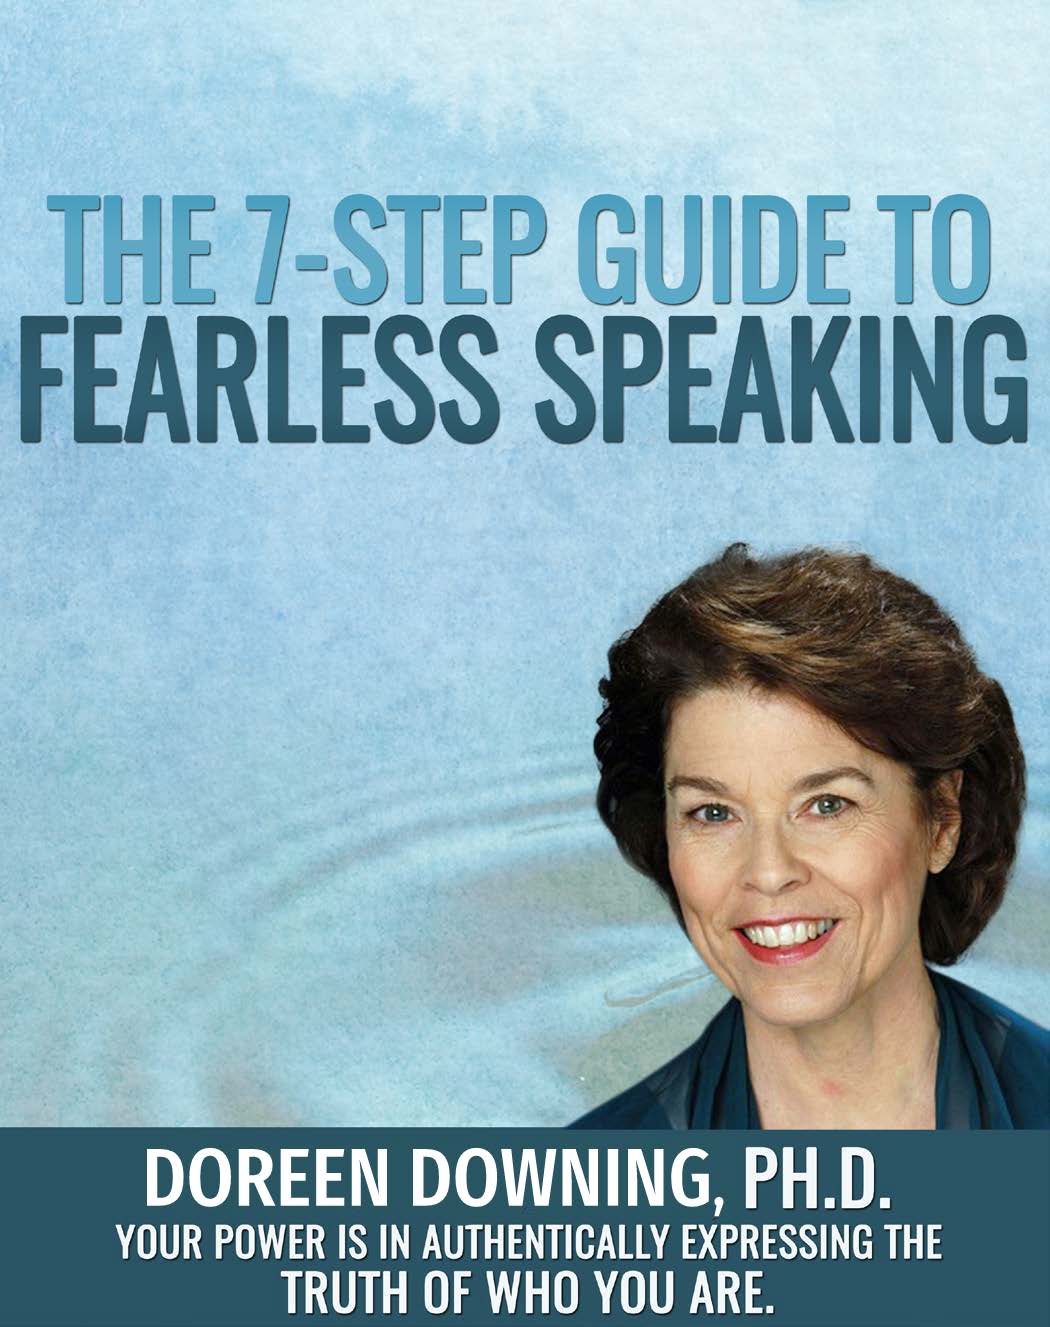 The 7-Step Guide to Fearless Speaking